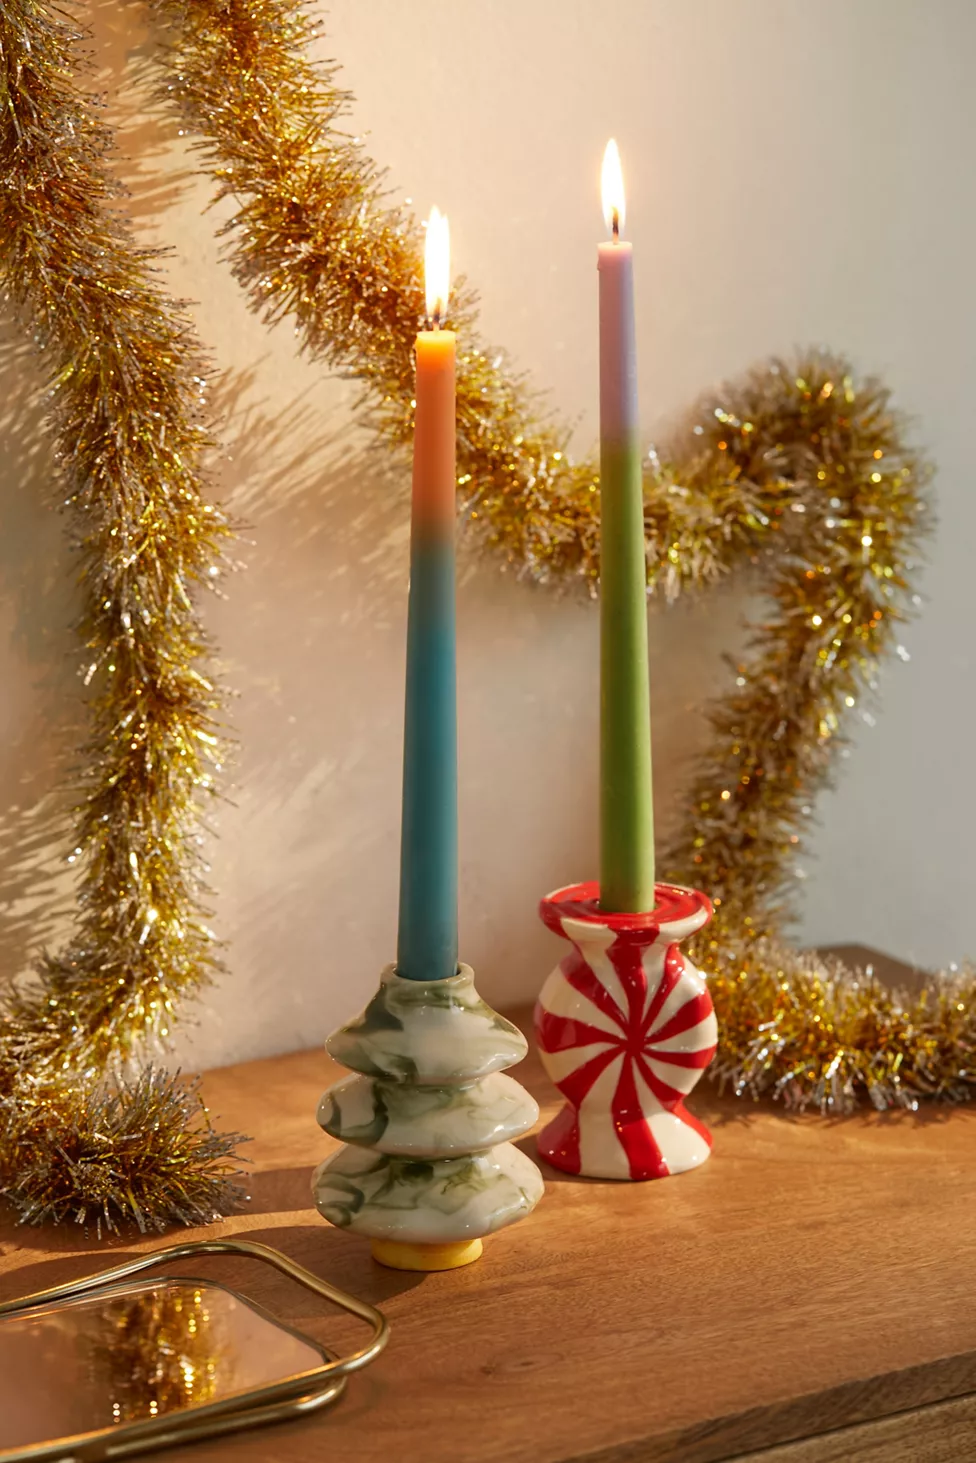 two taper candle holders: one is shaped like a tree and one is shaped like a peppermint candy